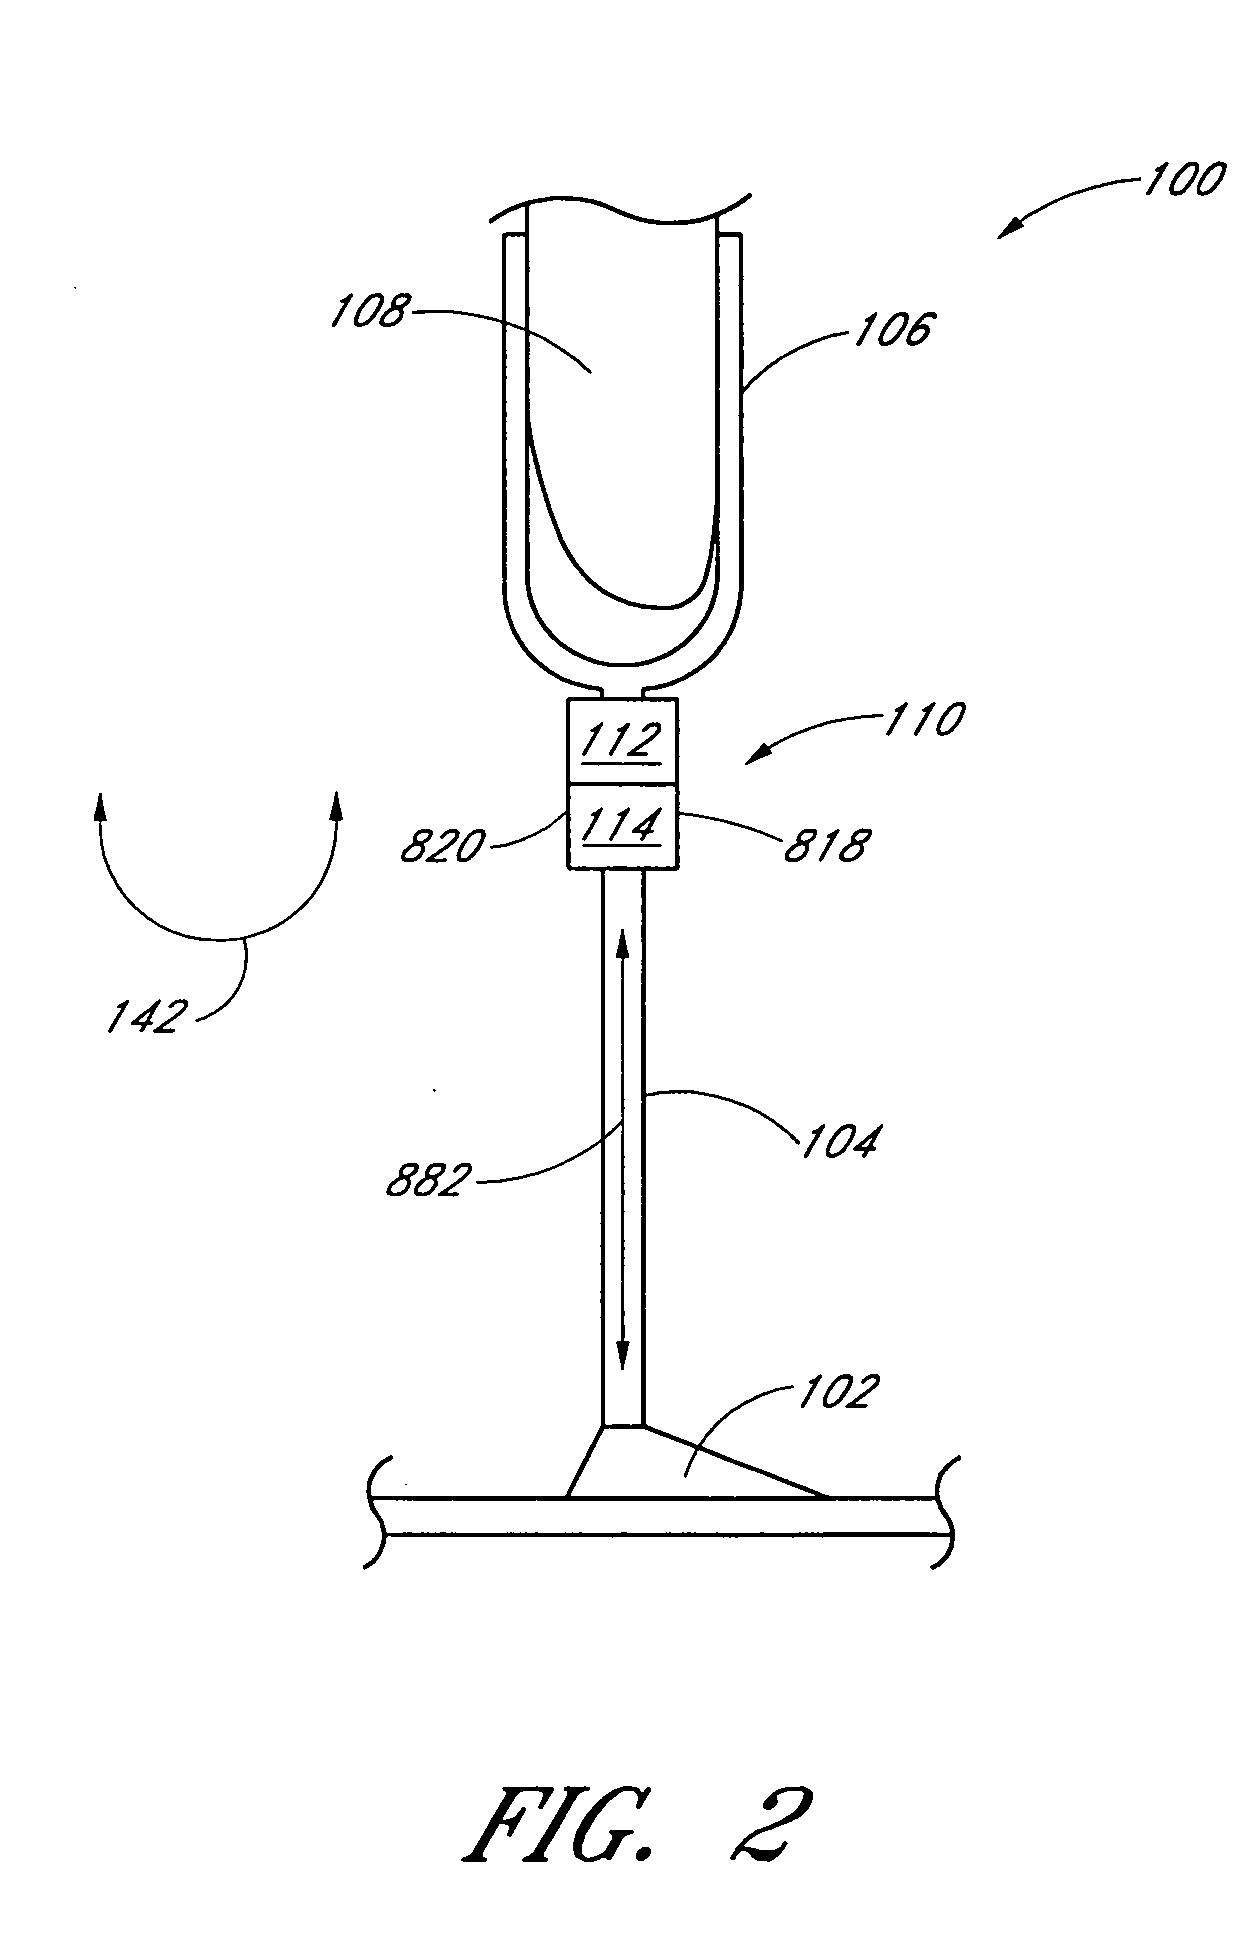 Dynamic seals for a prosthetic knee